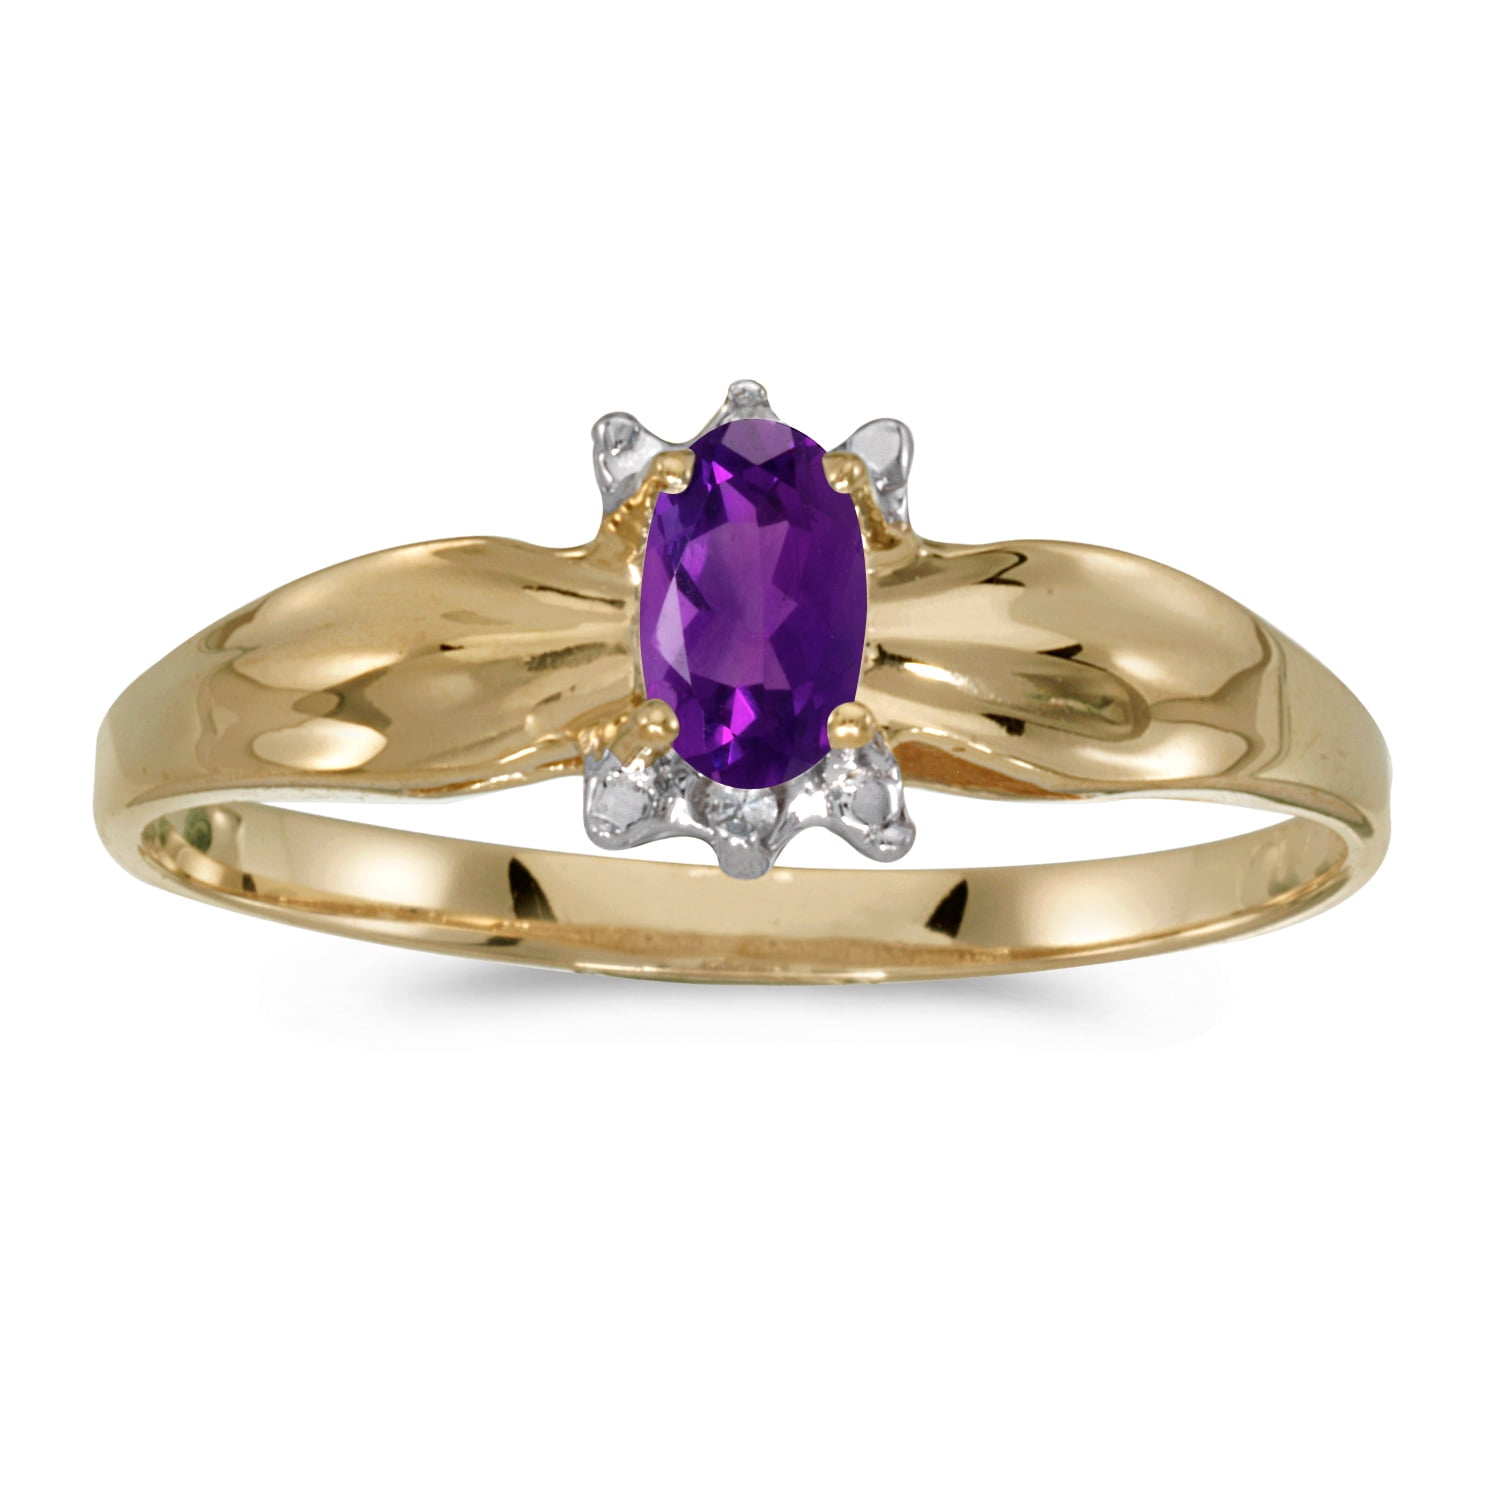 5 x 3 MM ctw 14k Gold Oval Purple Amethyst and Diamond Fashion Cocktail Anniversary Ring 0.18 Carat